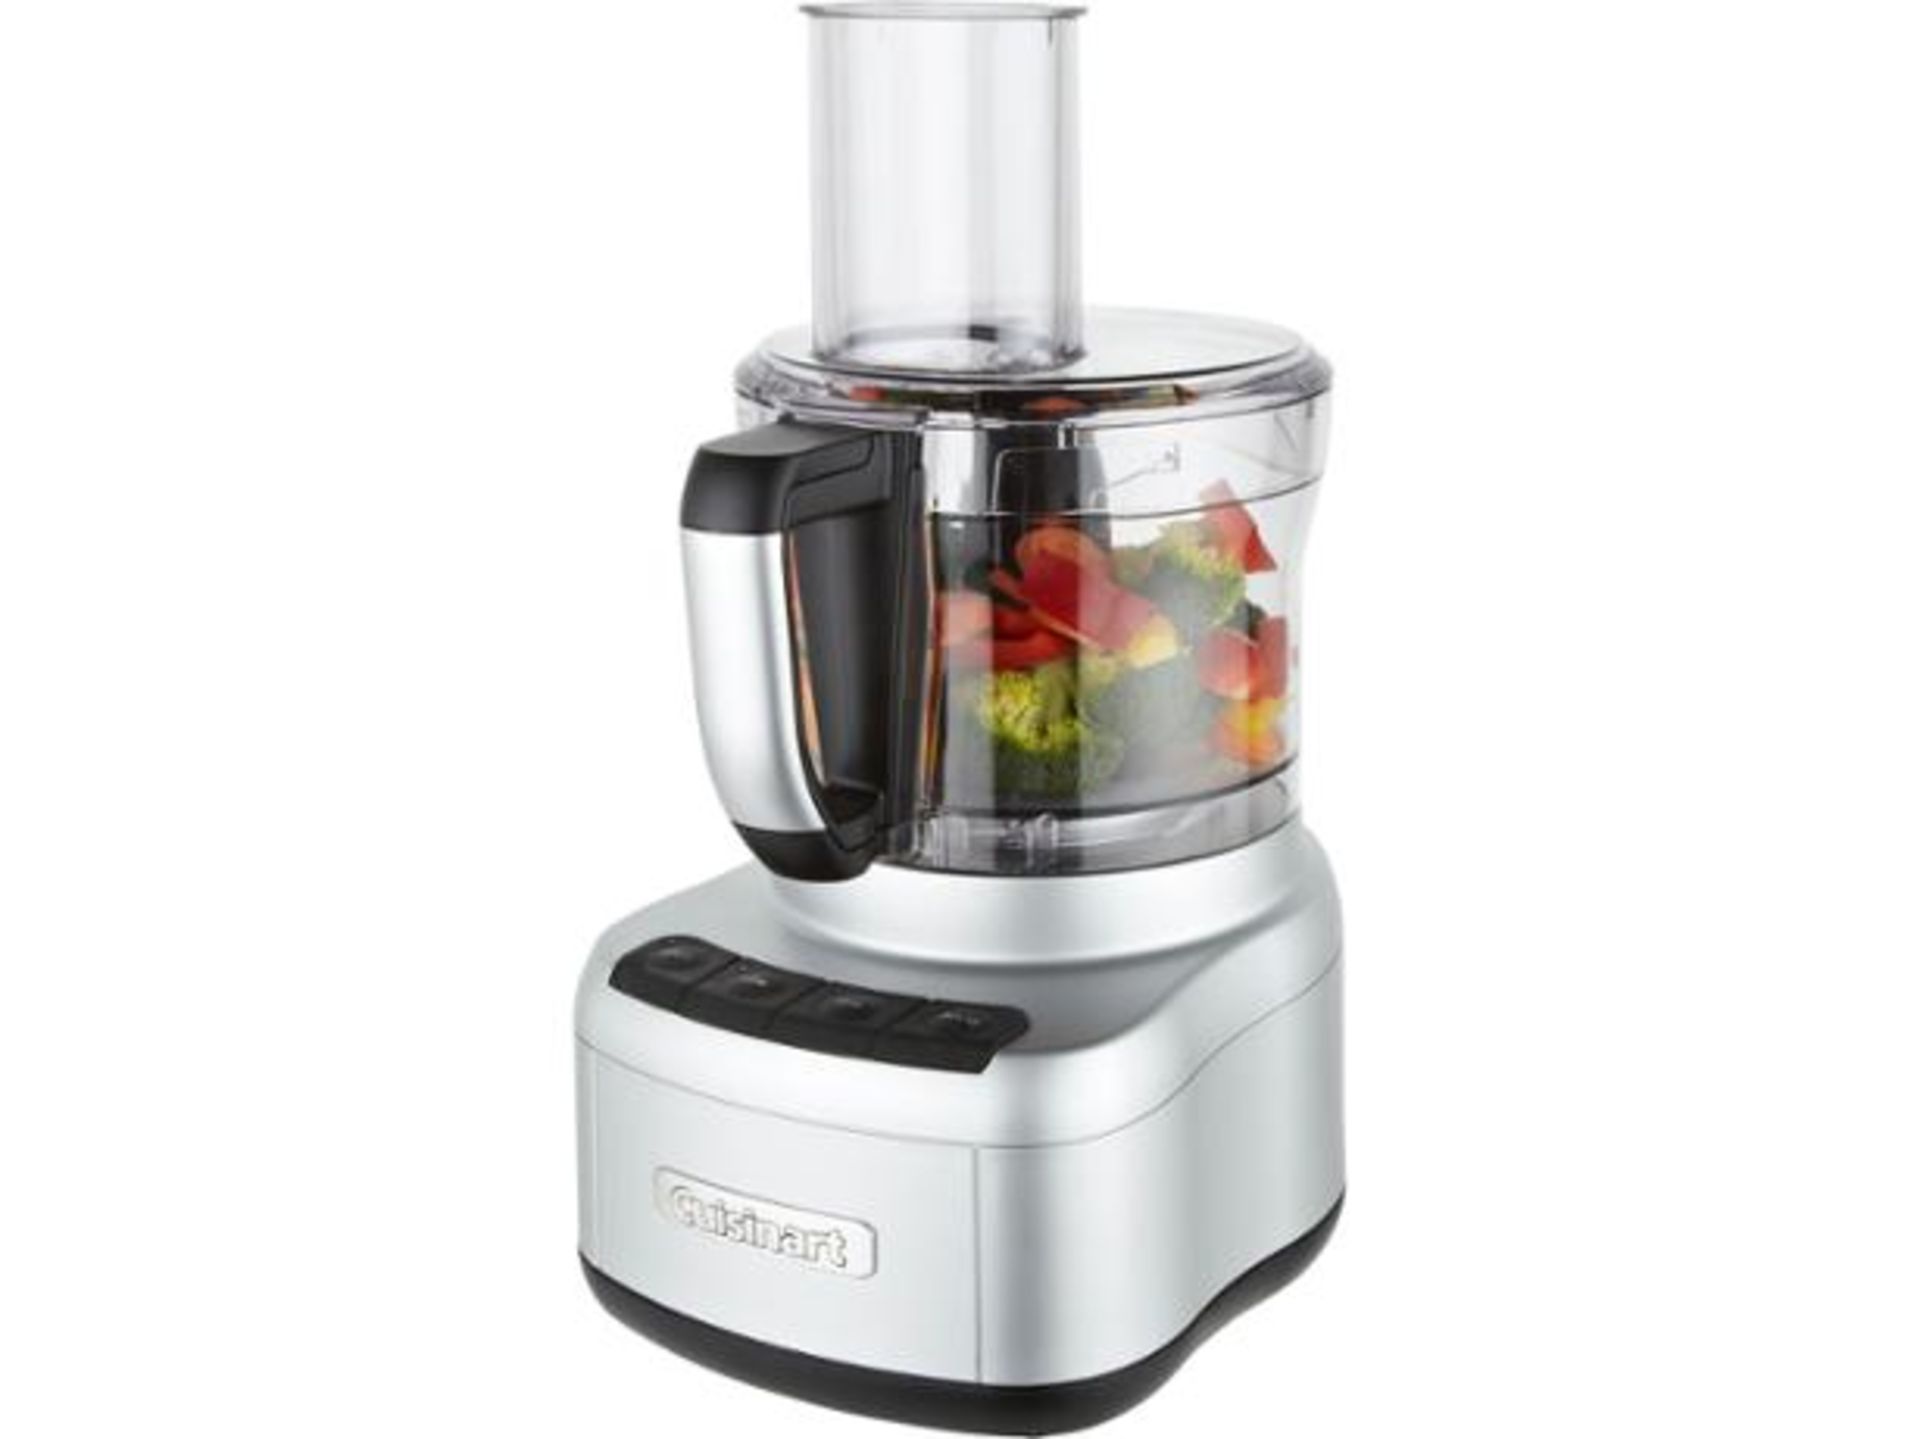 (M59) Cuisinart FP8U Easy Prep Pro, 2 Bowl Food Processor, Silver For mixing, pureeing, choppin...